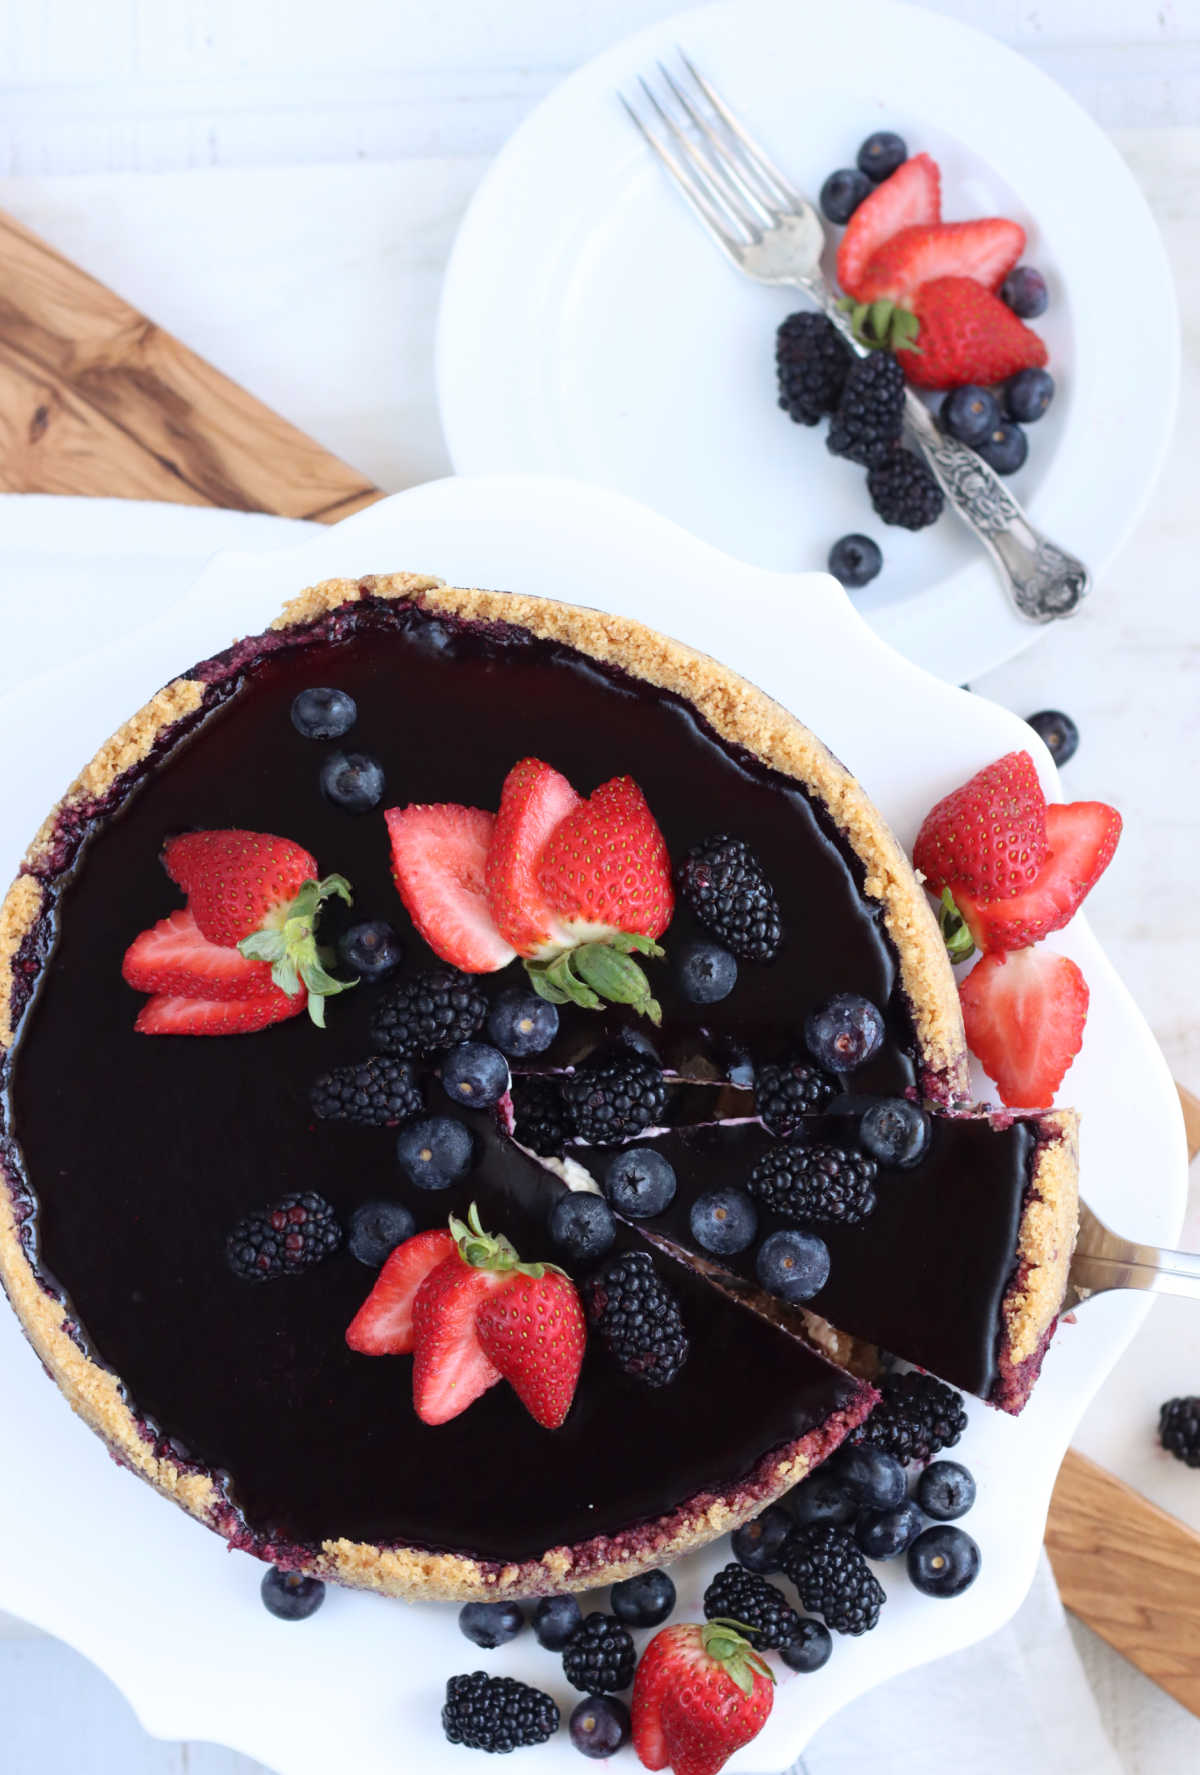 Cheesecake with berry topping on white footed cake dish, topped with strawberries, blackberries and blueberries, slice cut.